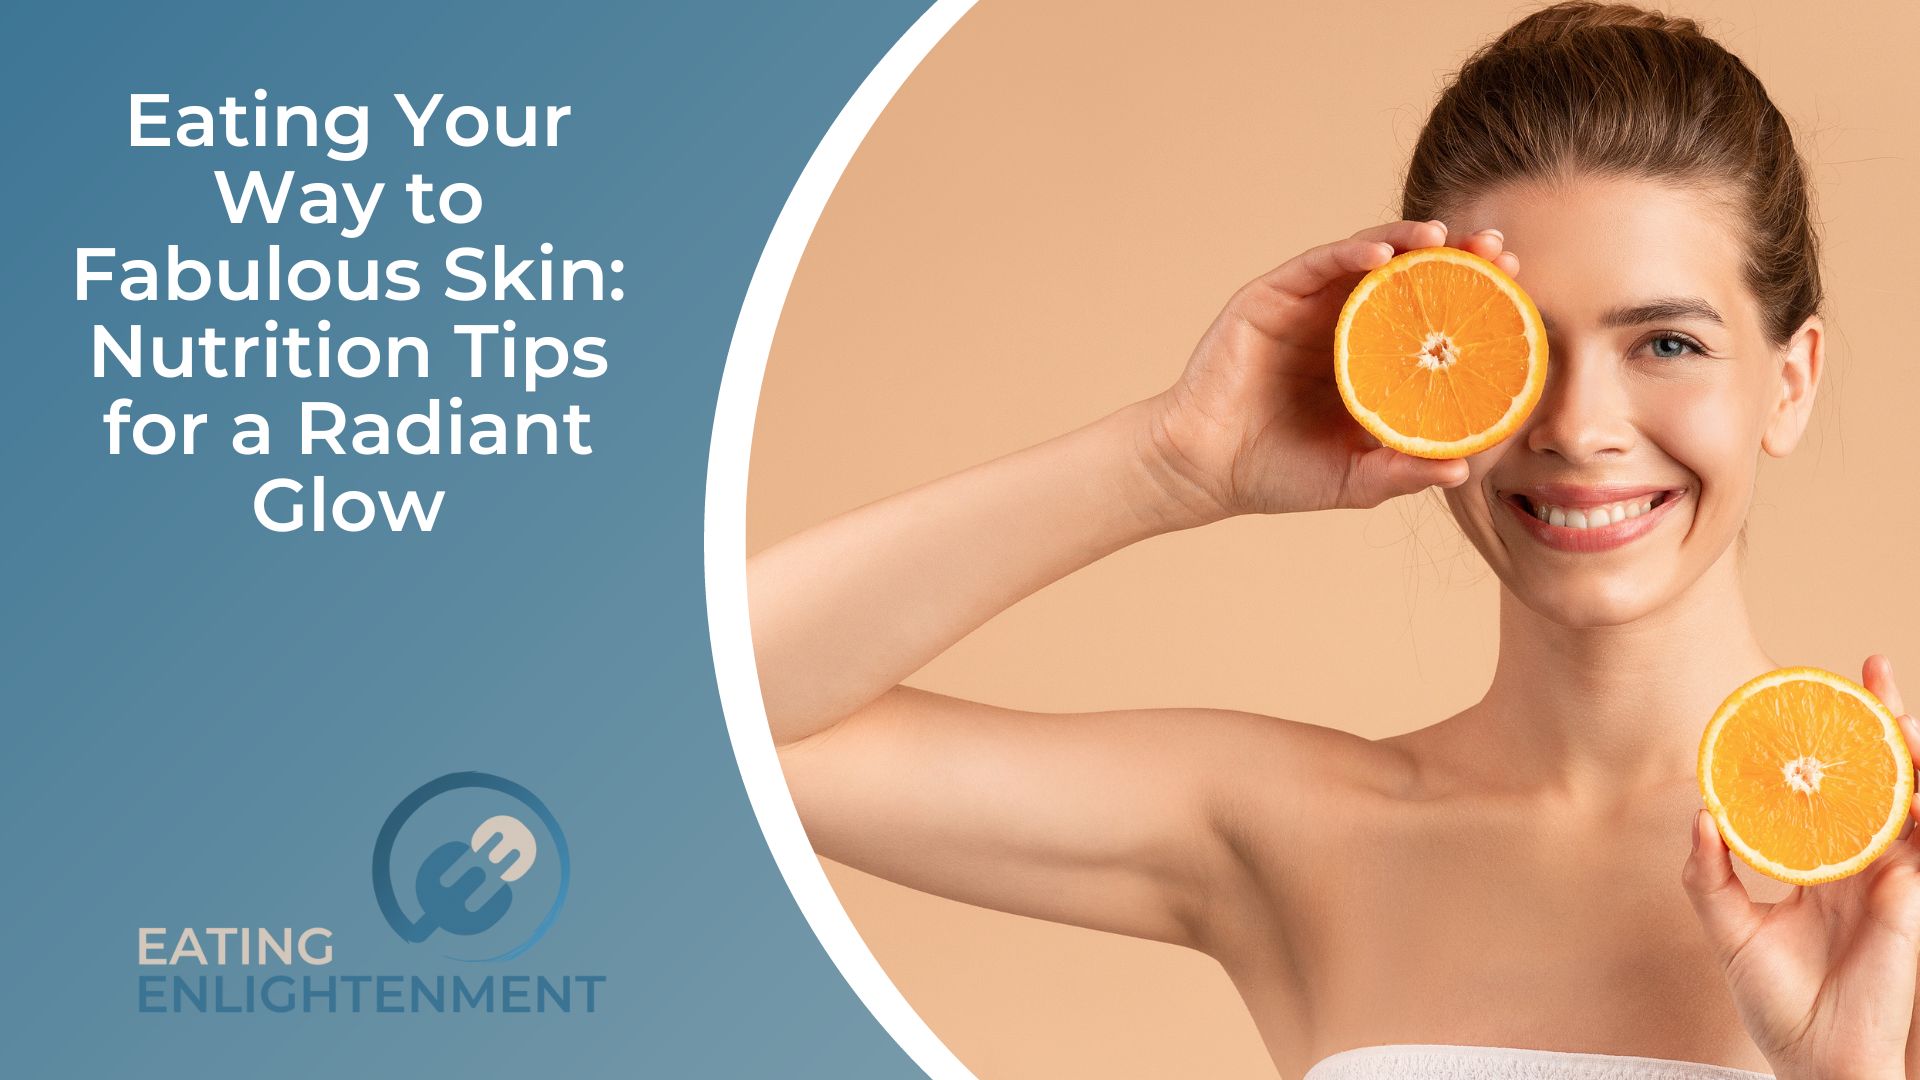 Eating Your Way to Fabulous Skin: 7 Nutrition Tips for a Radiant Glow